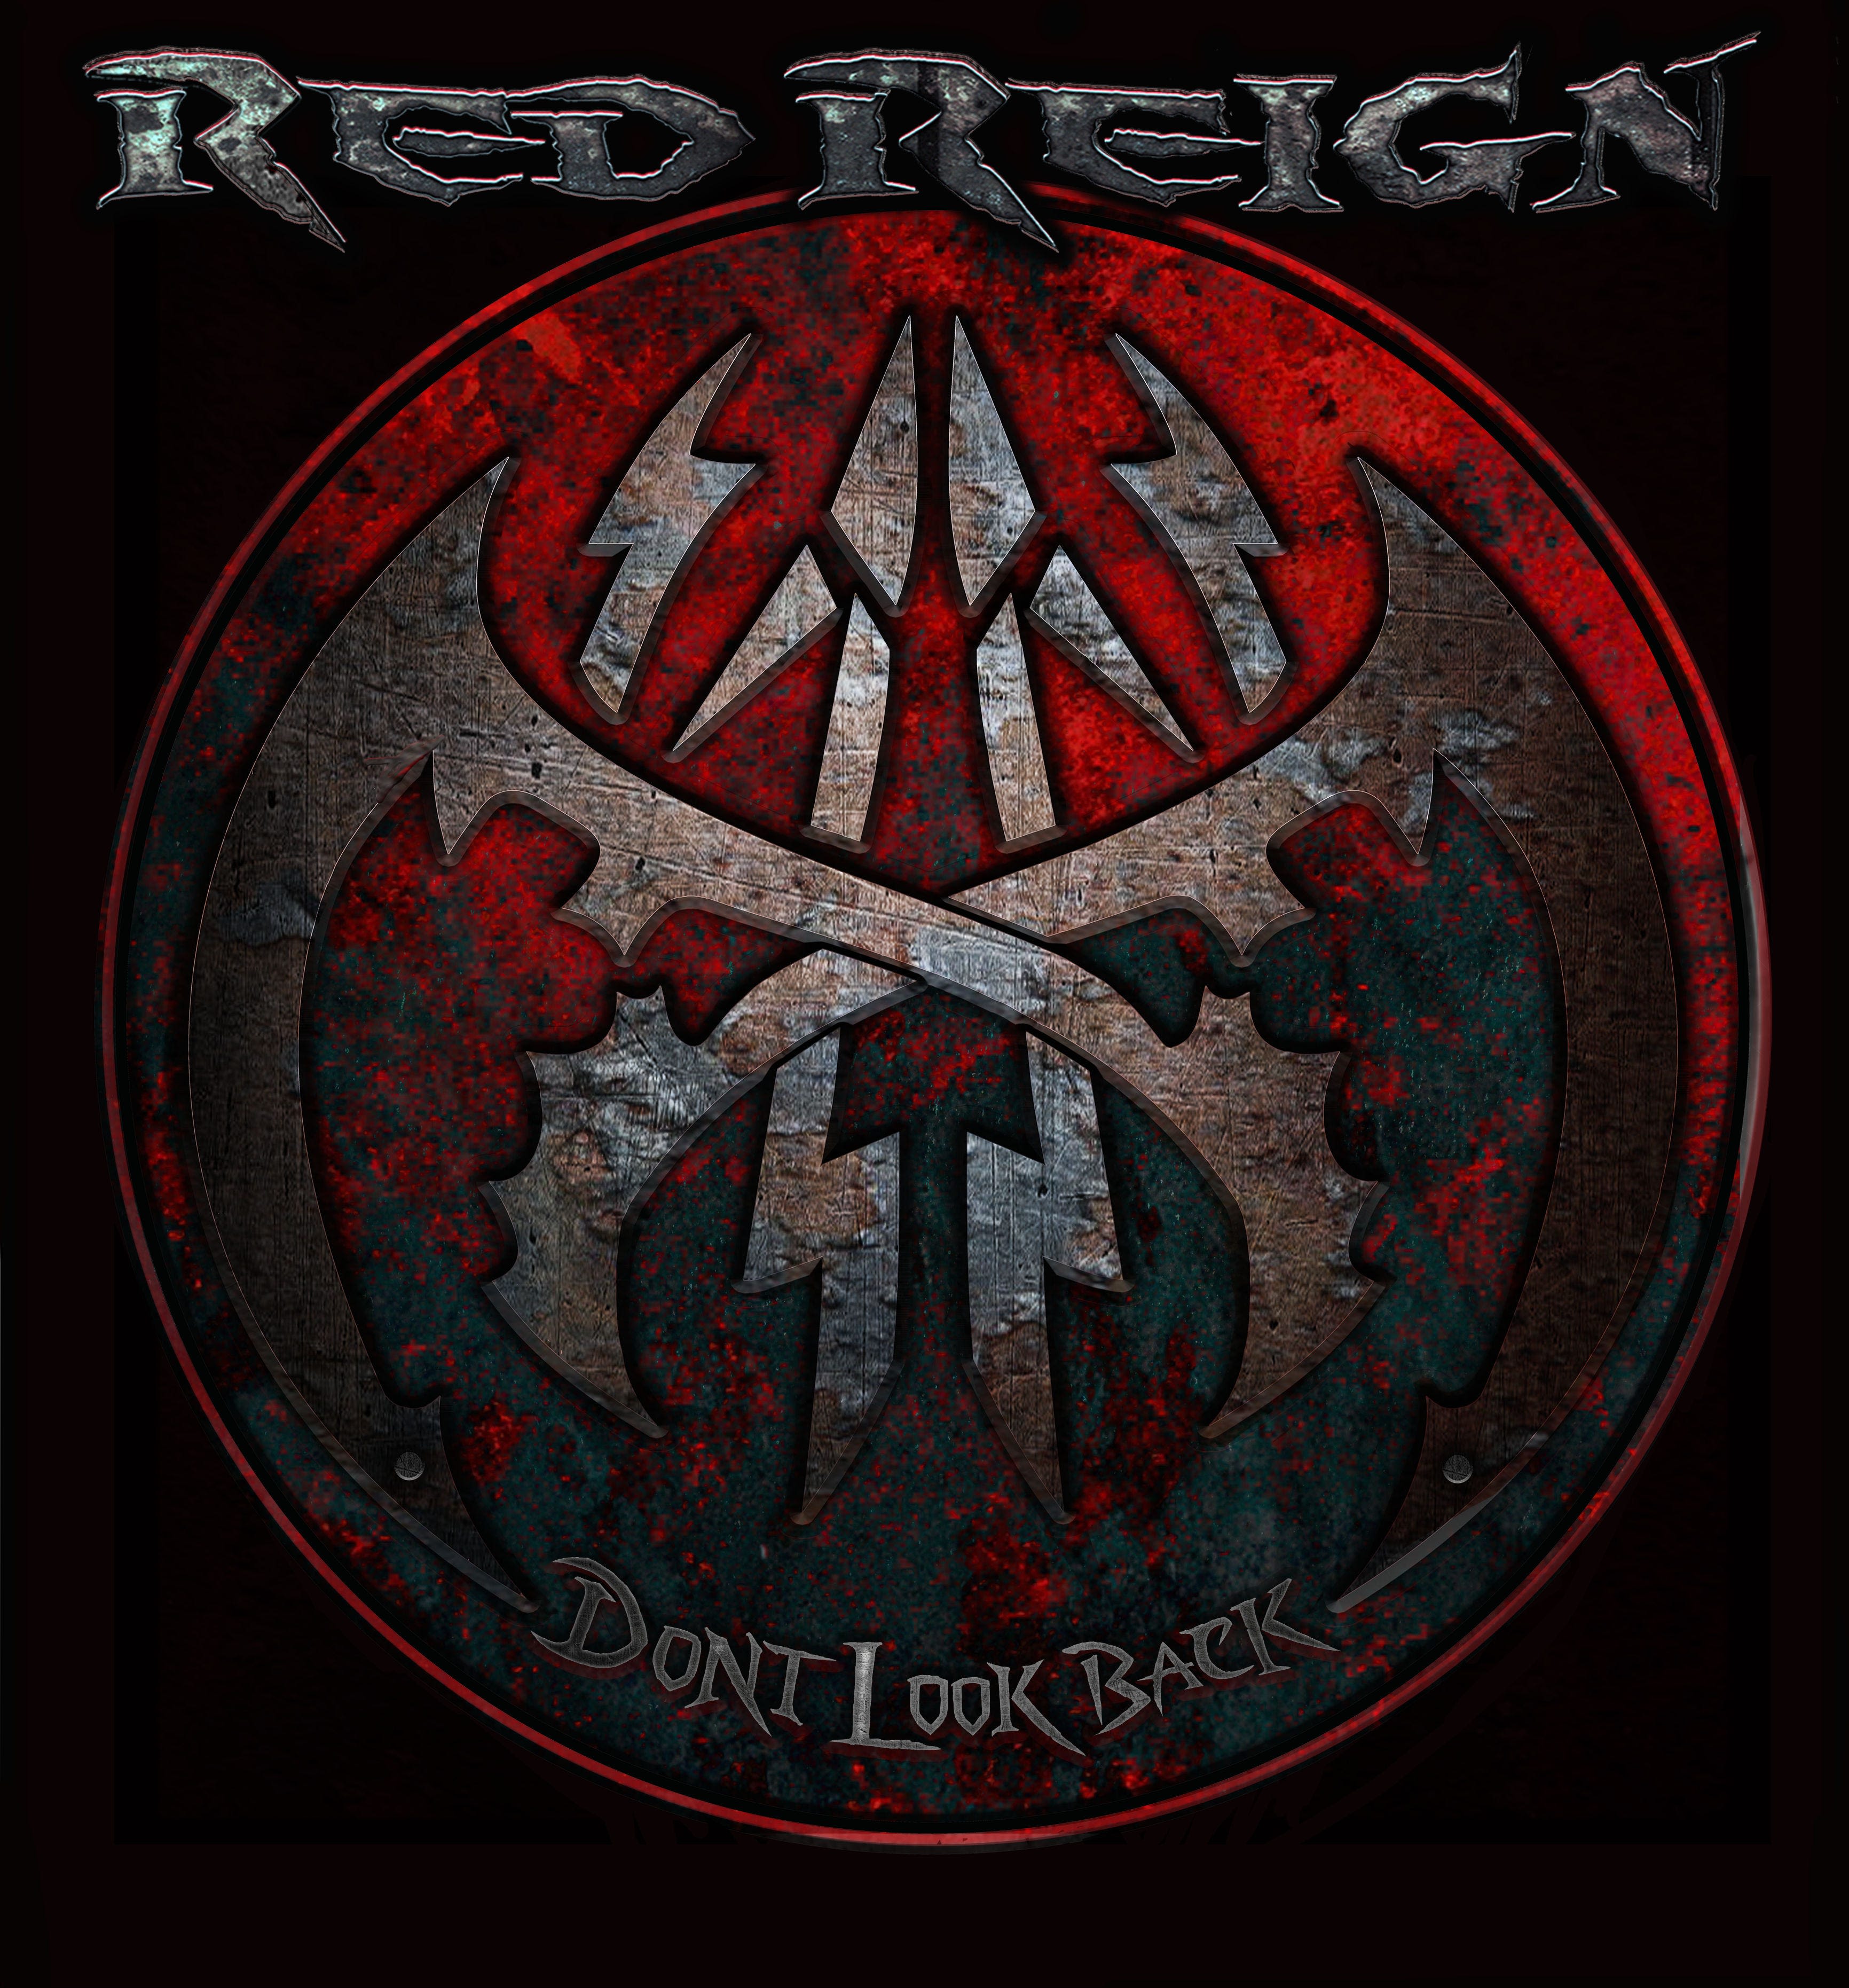 Red Reign's melodic power hard rock opens for Nazareth